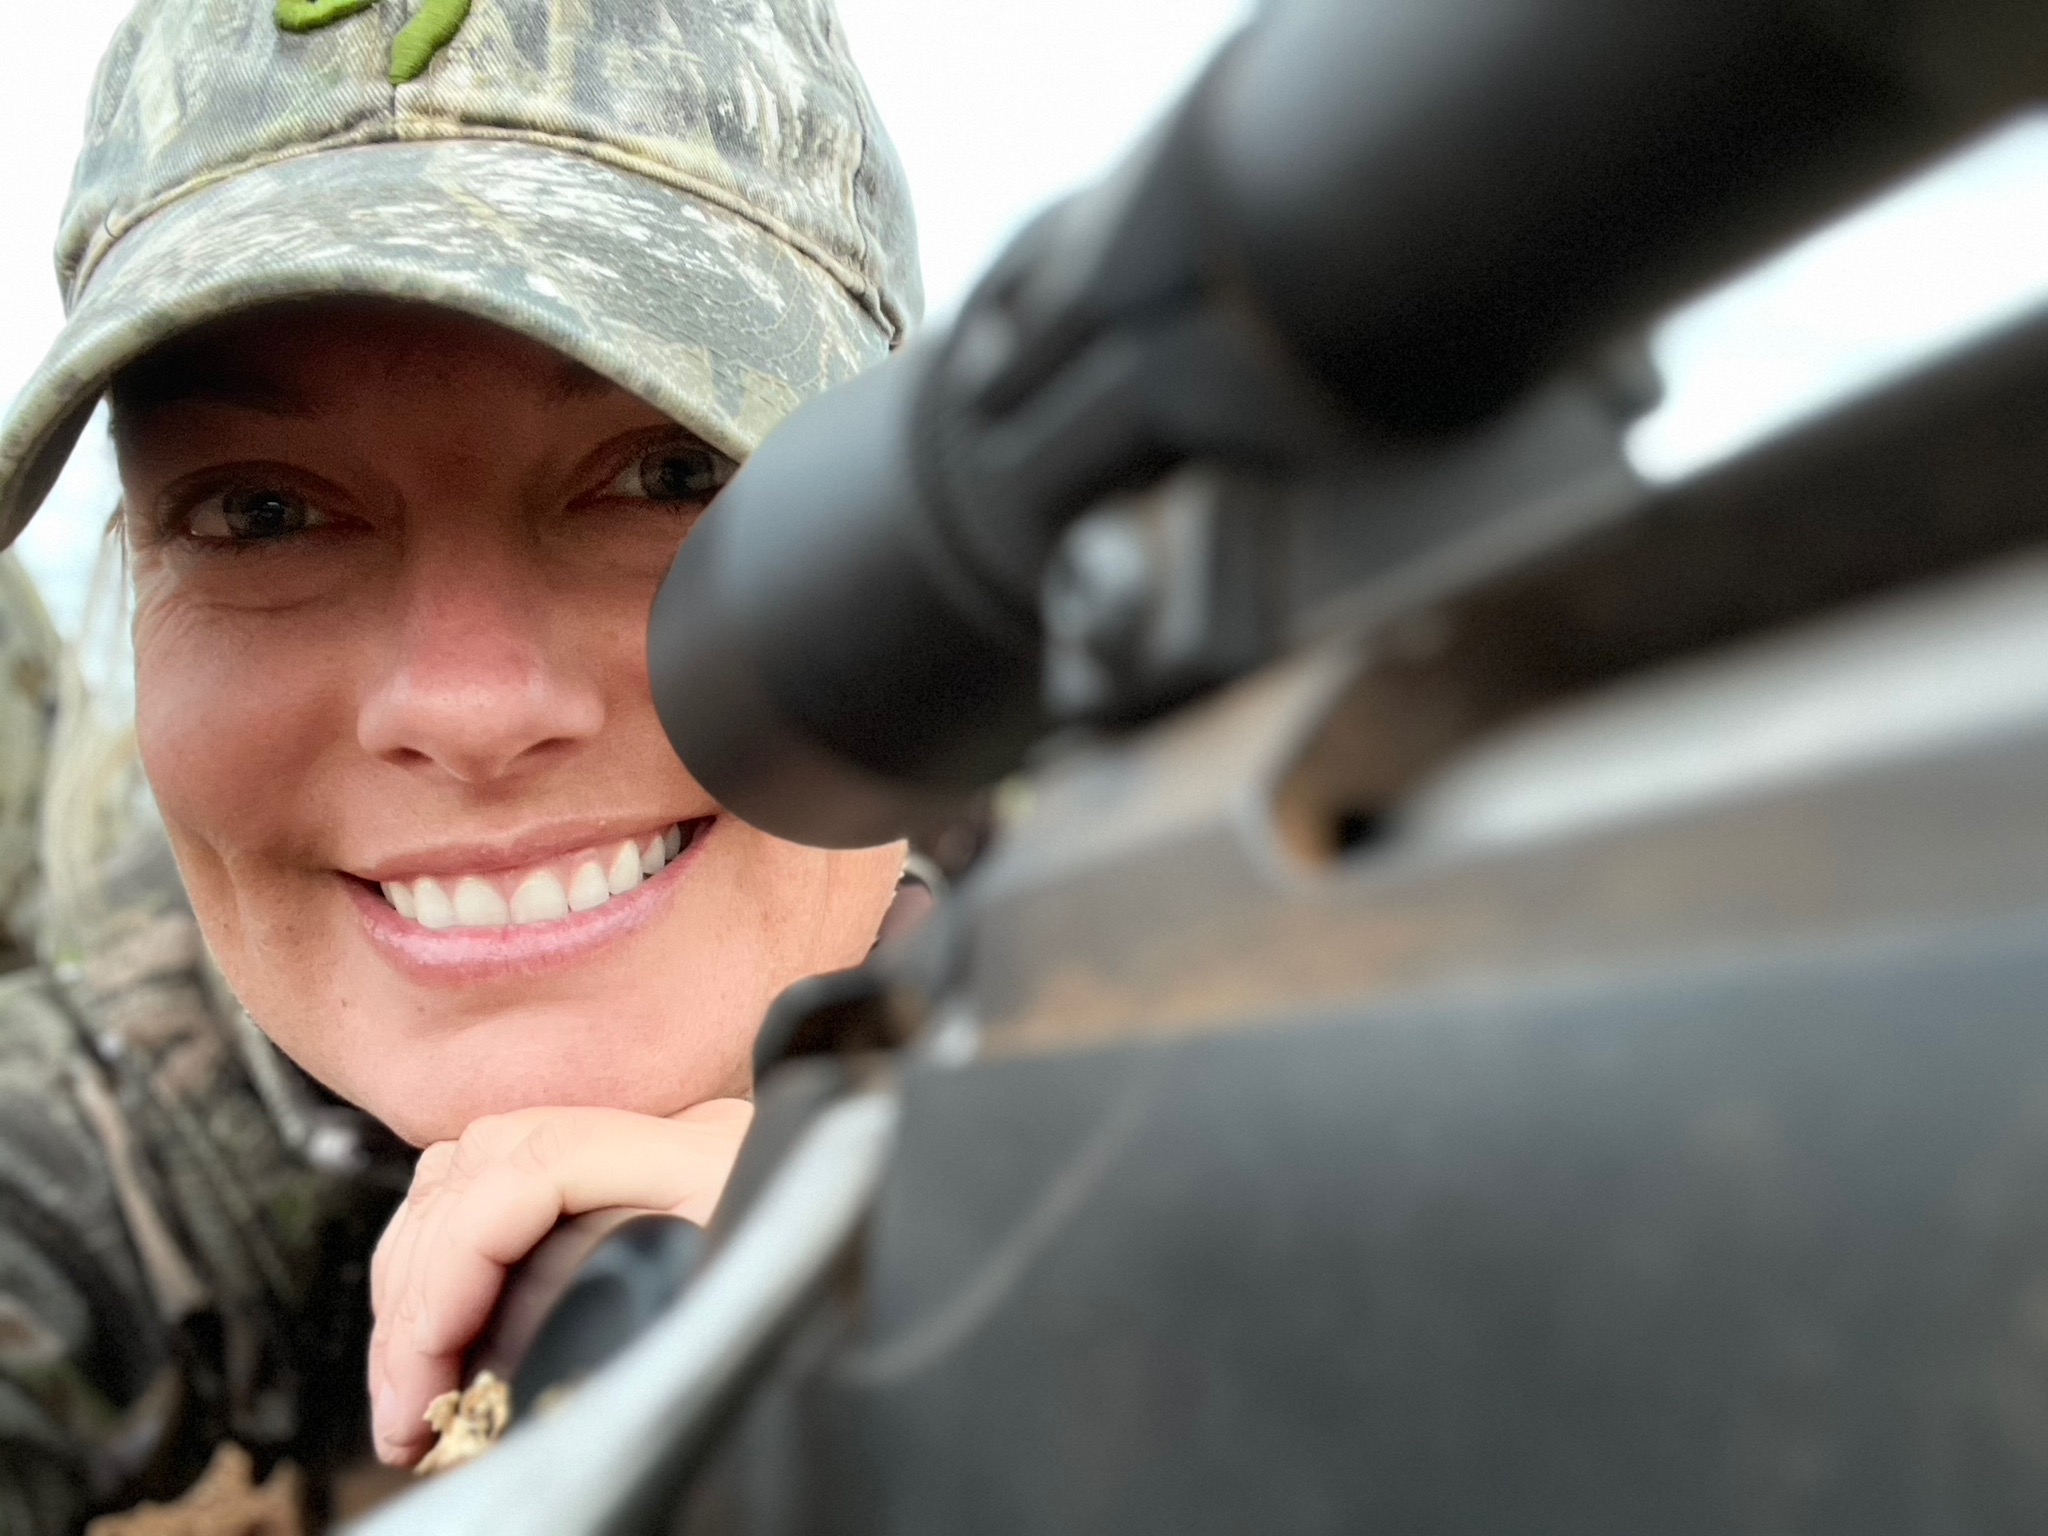 Where Will Women Outdoorsmen Be 1 Year from Now?